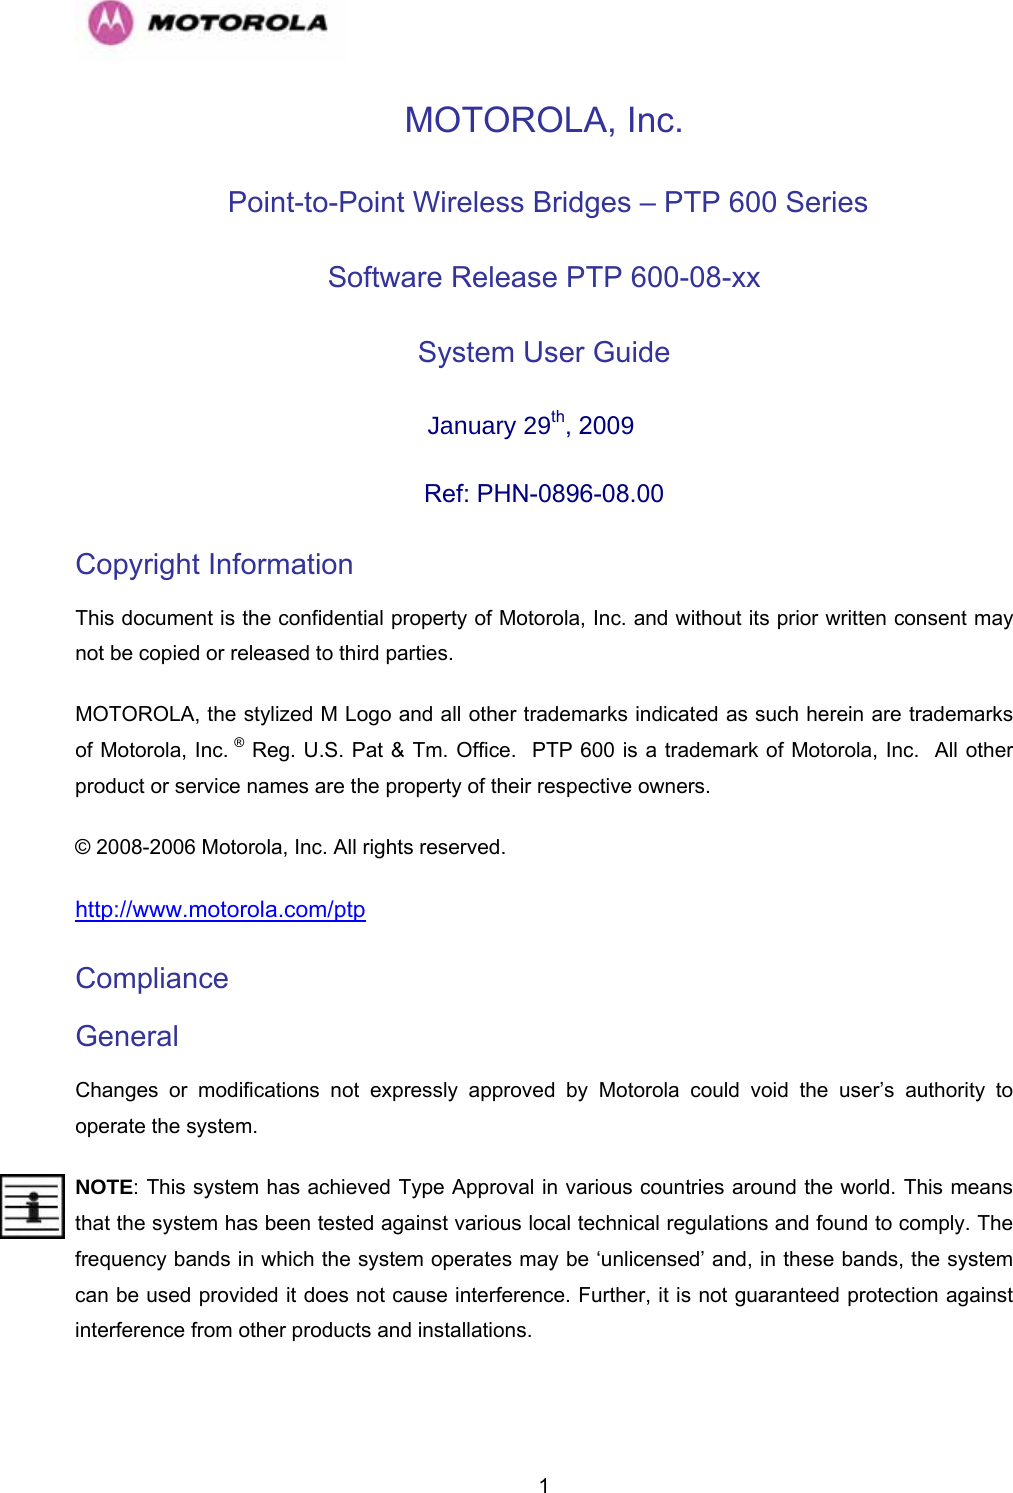   1MOTOROLA, Inc.  Point-to-Point Wireless Bridges – PTP 600 Series Software Release PTP 600-08-xx System User Guide  January 29th, 2009 Ref: PHN-0896-08.00 Copyright Information This document is the confidential property of Motorola, Inc. and without its prior written consent may not be copied or released to third parties.  MOTOROLA, the stylized M Logo and all other trademarks indicated as such herein are trademarks of Motorola, Inc. ® Reg. U.S. Pat &amp; Tm. Office.  PTP 600 is a trademark of Motorola, Inc.  All other product or service names are the property of their respective owners. © 2008-2006 Motorola, Inc. All rights reserved. http://www.motorola.com/ptp Compliance  General Changes or modifications not expressly approved by Motorola could void the user’s authority to operate the system.  NOTE: This system has achieved Type Approval in various countries around the world. This means that the system has been tested against various local technical regulations and found to comply. The frequency bands in which the system operates may be ‘unlicensed’ and, in these bands, the system can be used provided it does not cause interference. Further, it is not guaranteed protection against interference from other products and installations. 